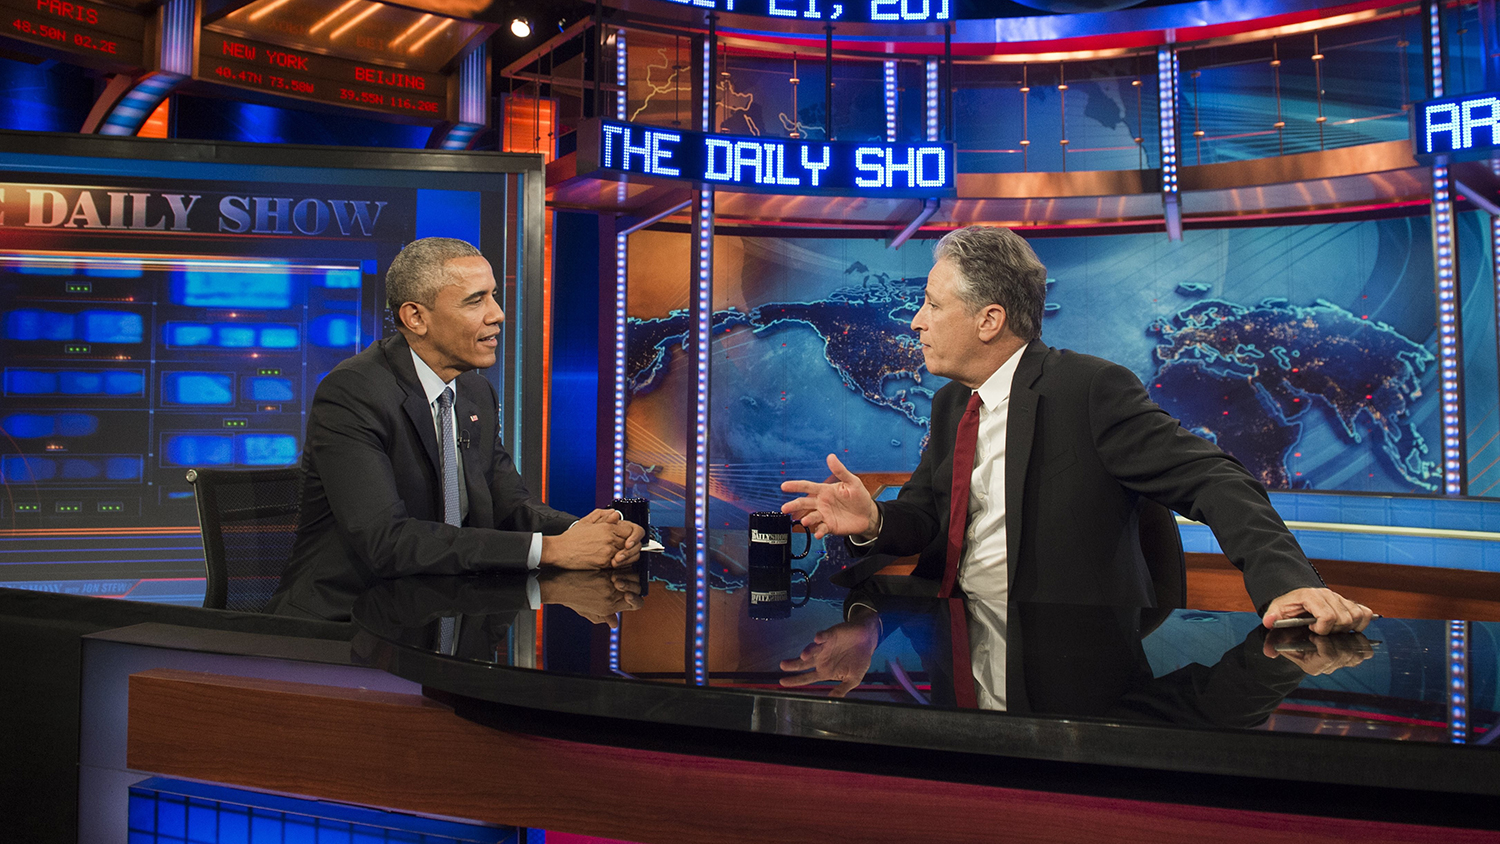 US President Barack Obama speaks with Jon Stewart, host of 'The Daily Show with Jon Stewart,' during a taping of the show in New York, July 21, 2015.
